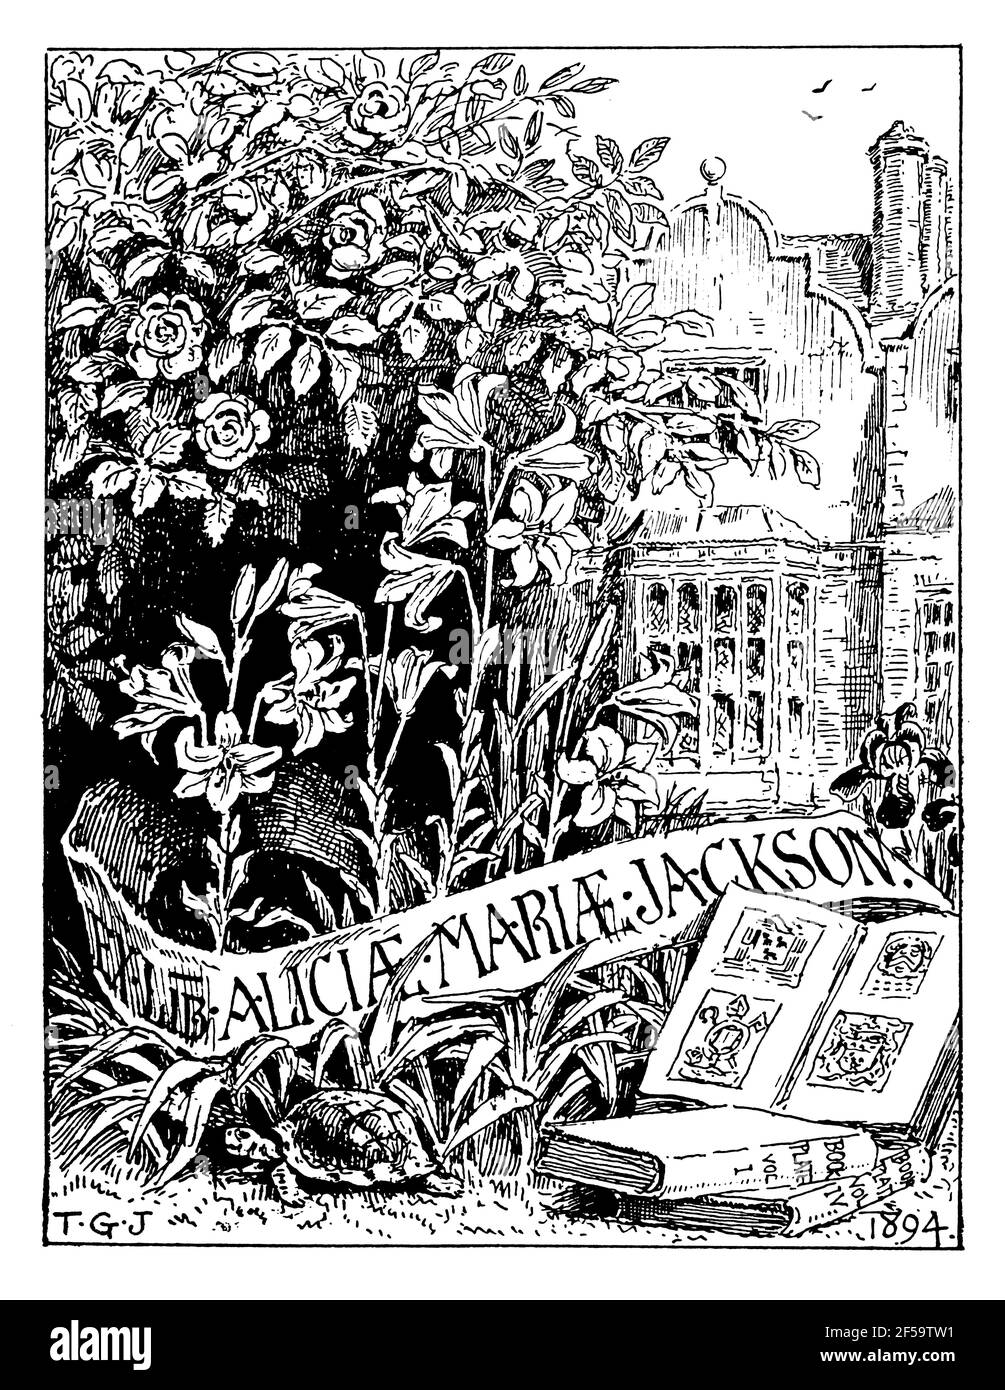 1894 Pictorial bookplate with books in garden of grand house for Alice Maria Jackson by architect Sir Thomas Graham Jackson RA Stock Photo